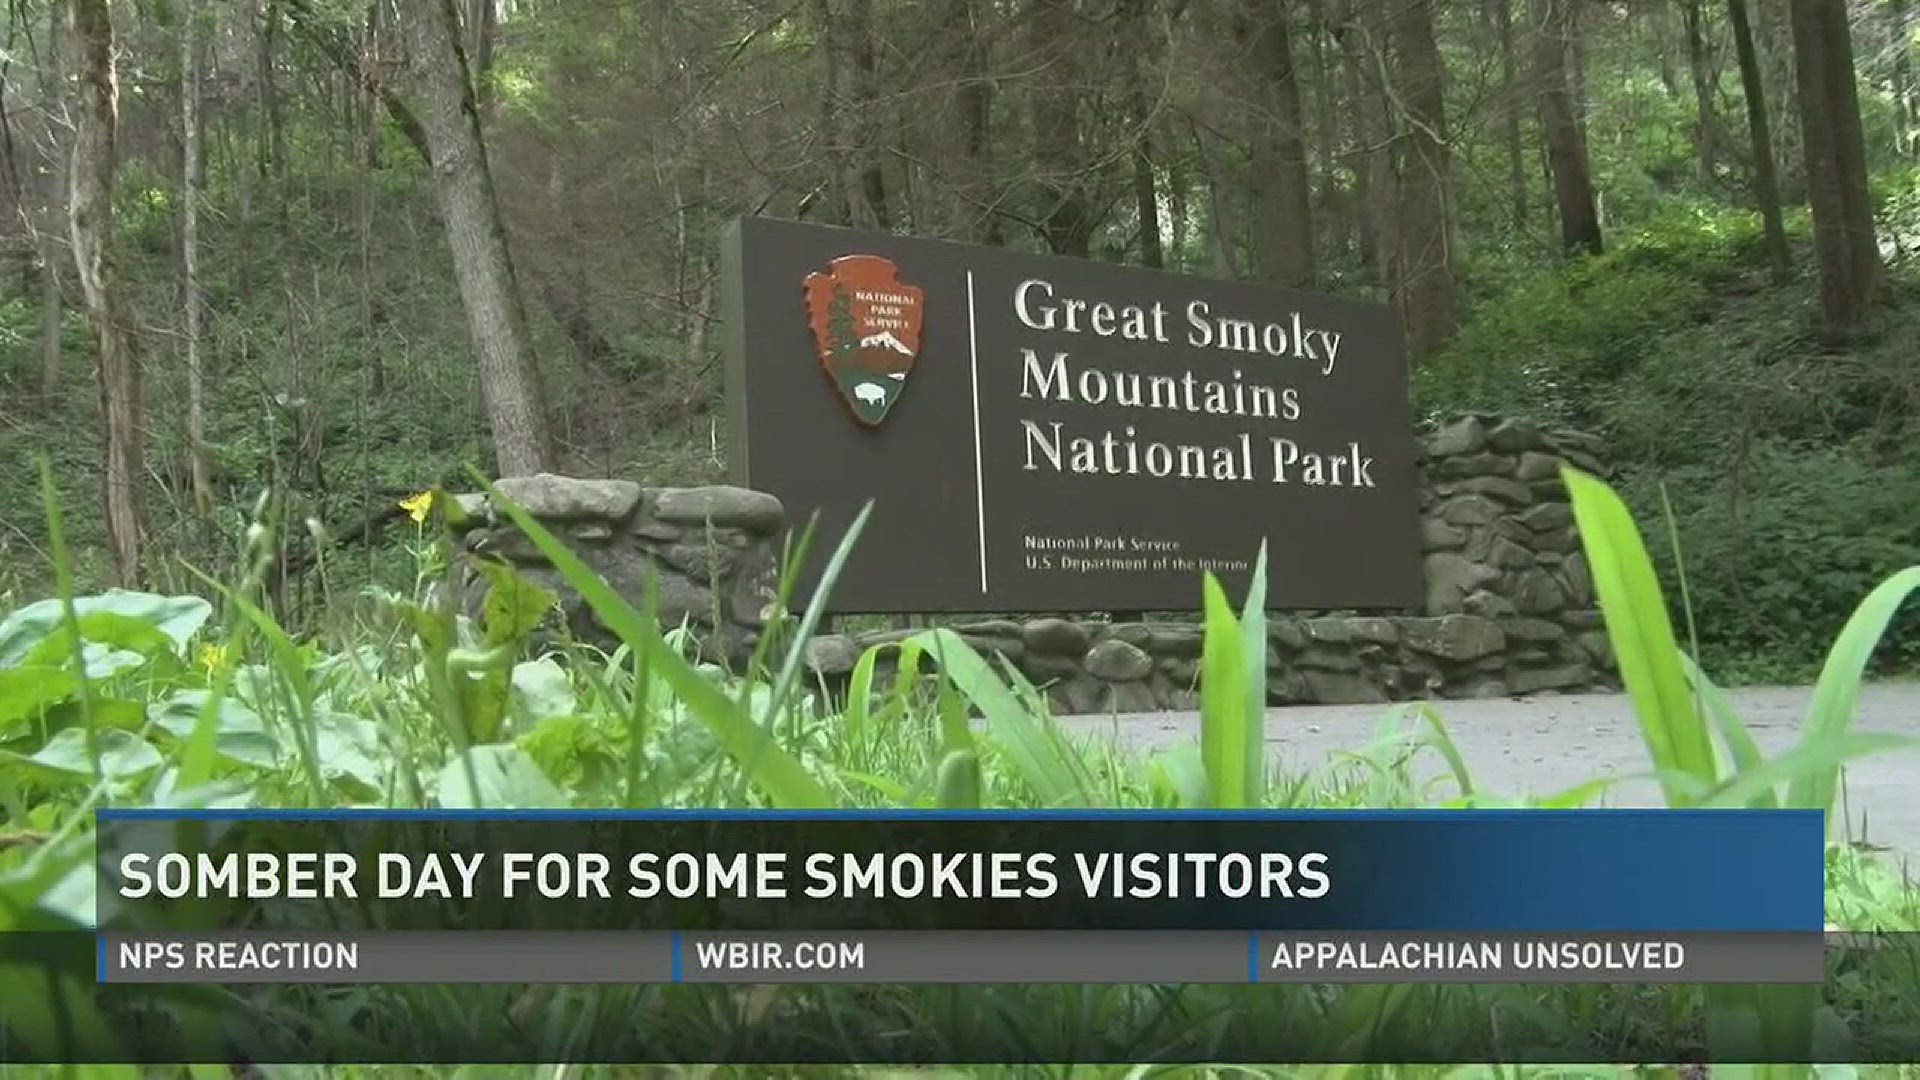 June 30, 2017: Visitors to Great Smoky Mountains National Park respond to the decision to drop the state charges against the teens accused of starting the Chimney Tops 2 fire.